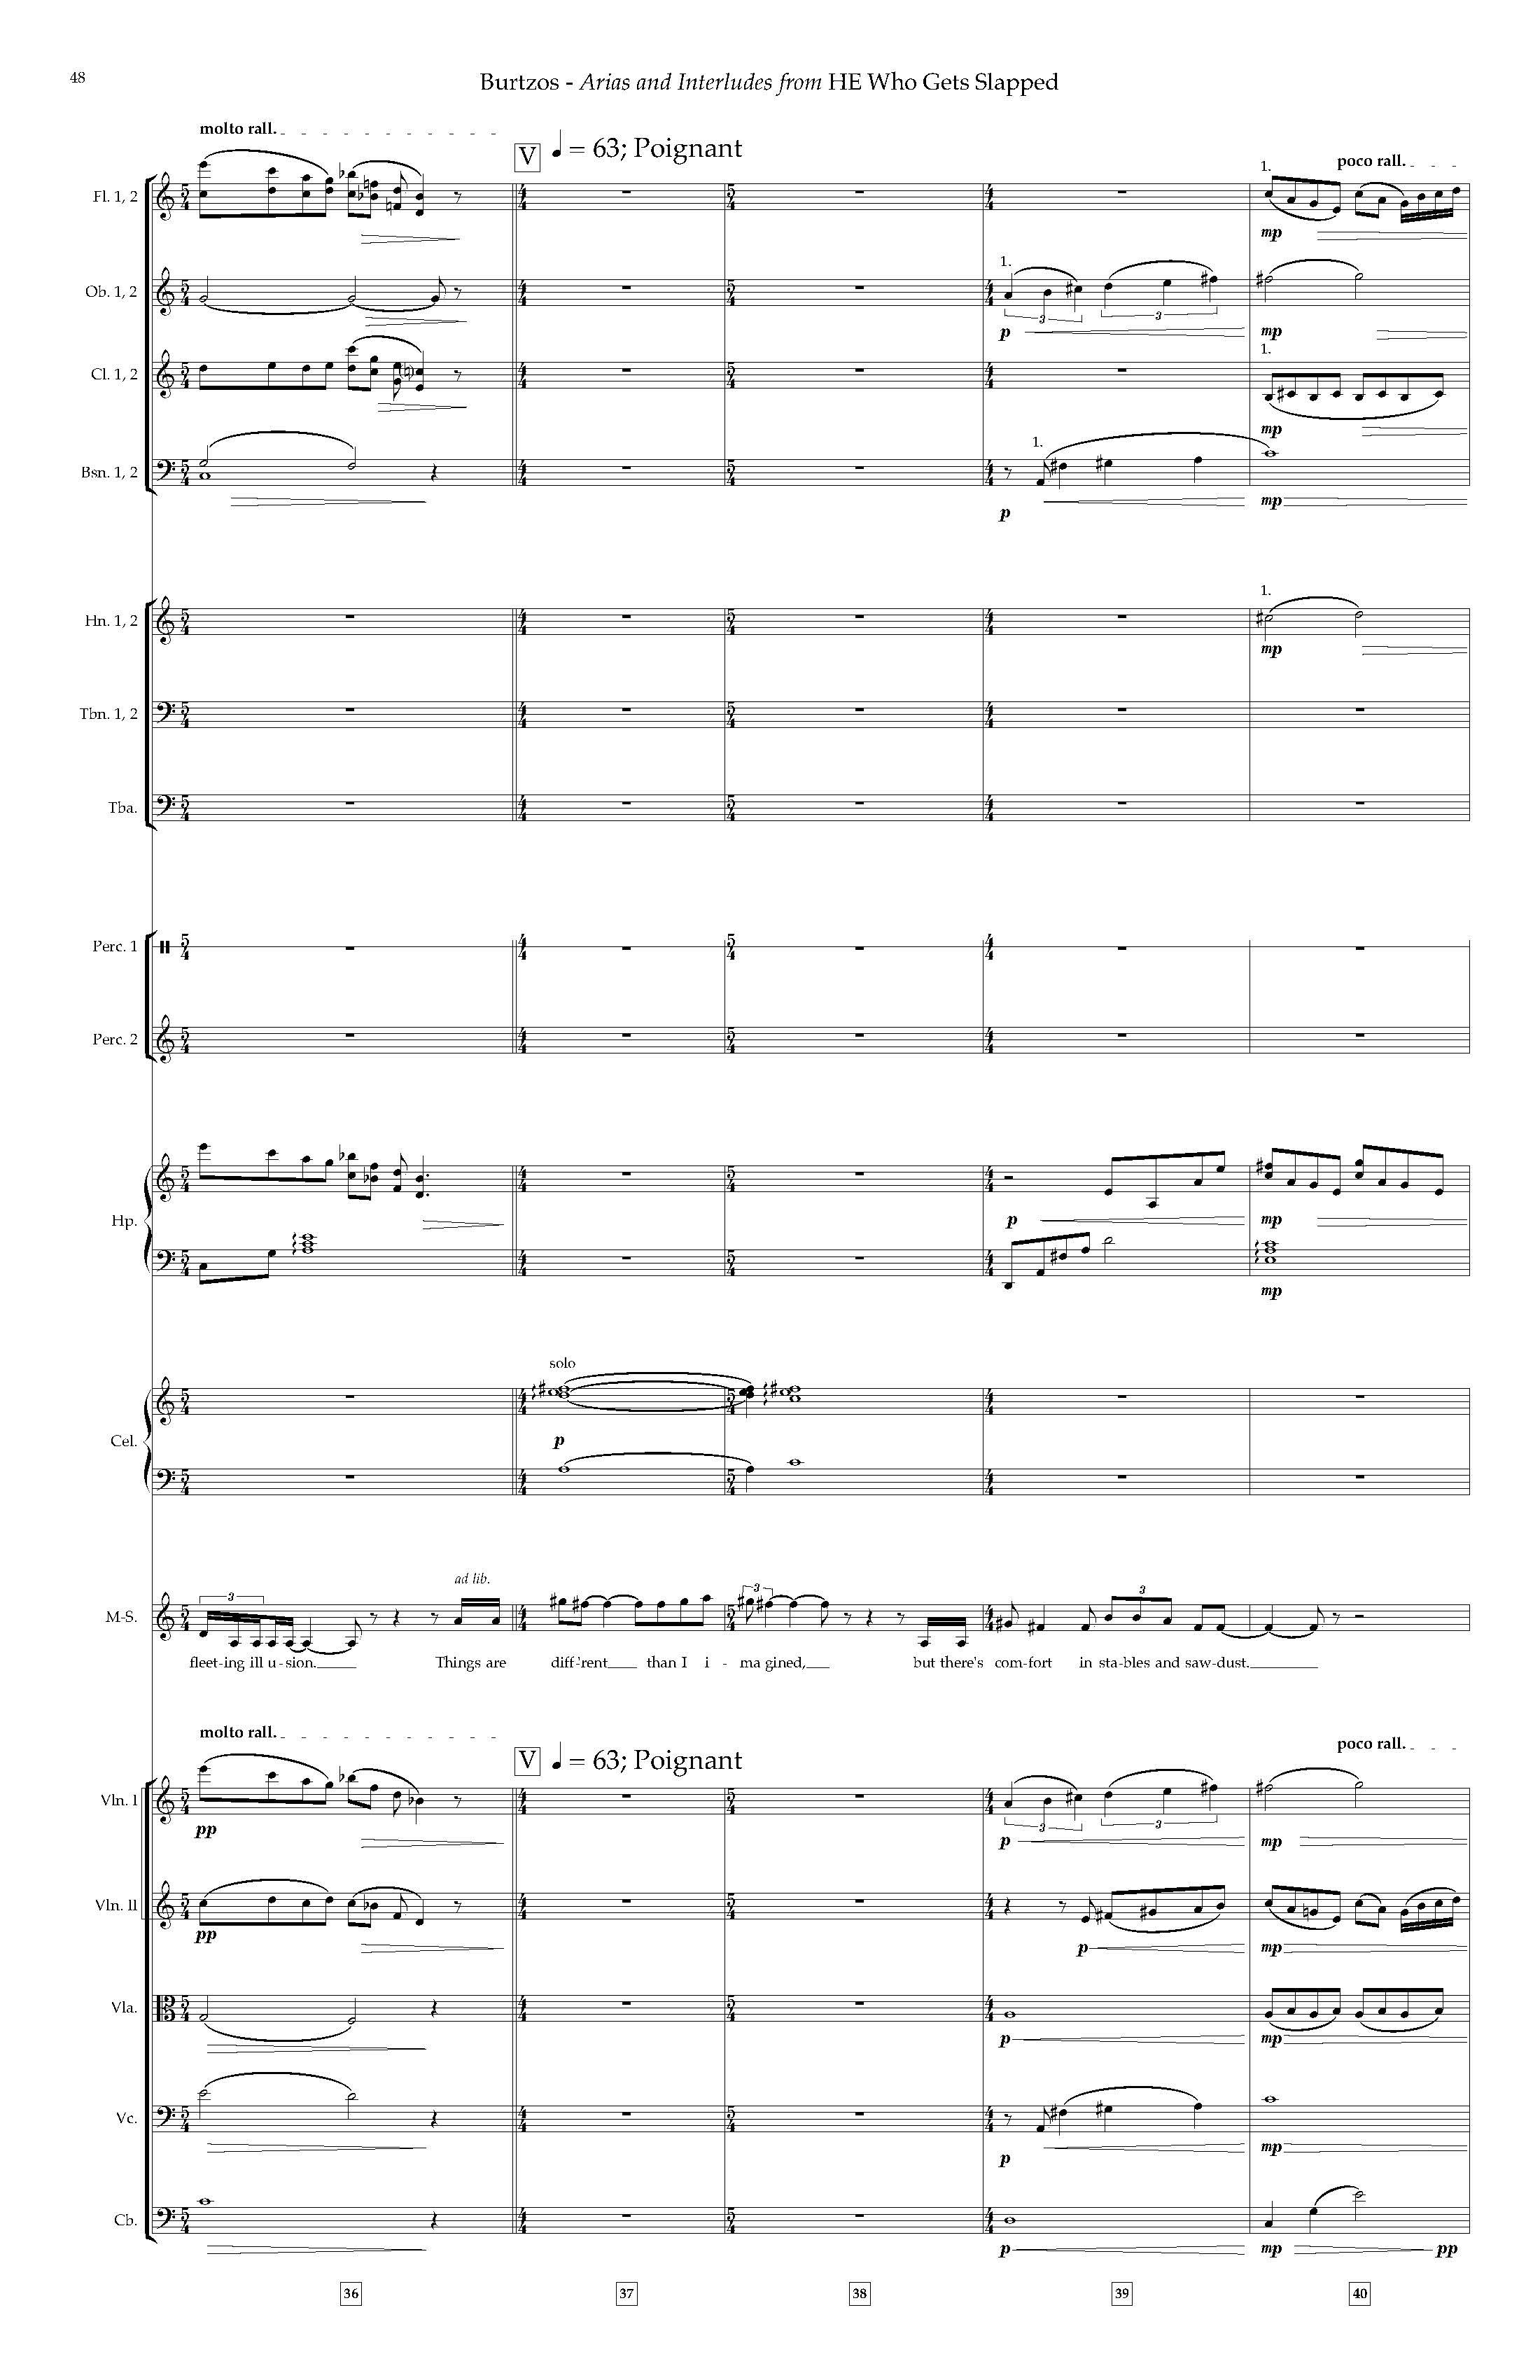 Arias and Interludes from HWGS - Complete Score_Page_54.jpg